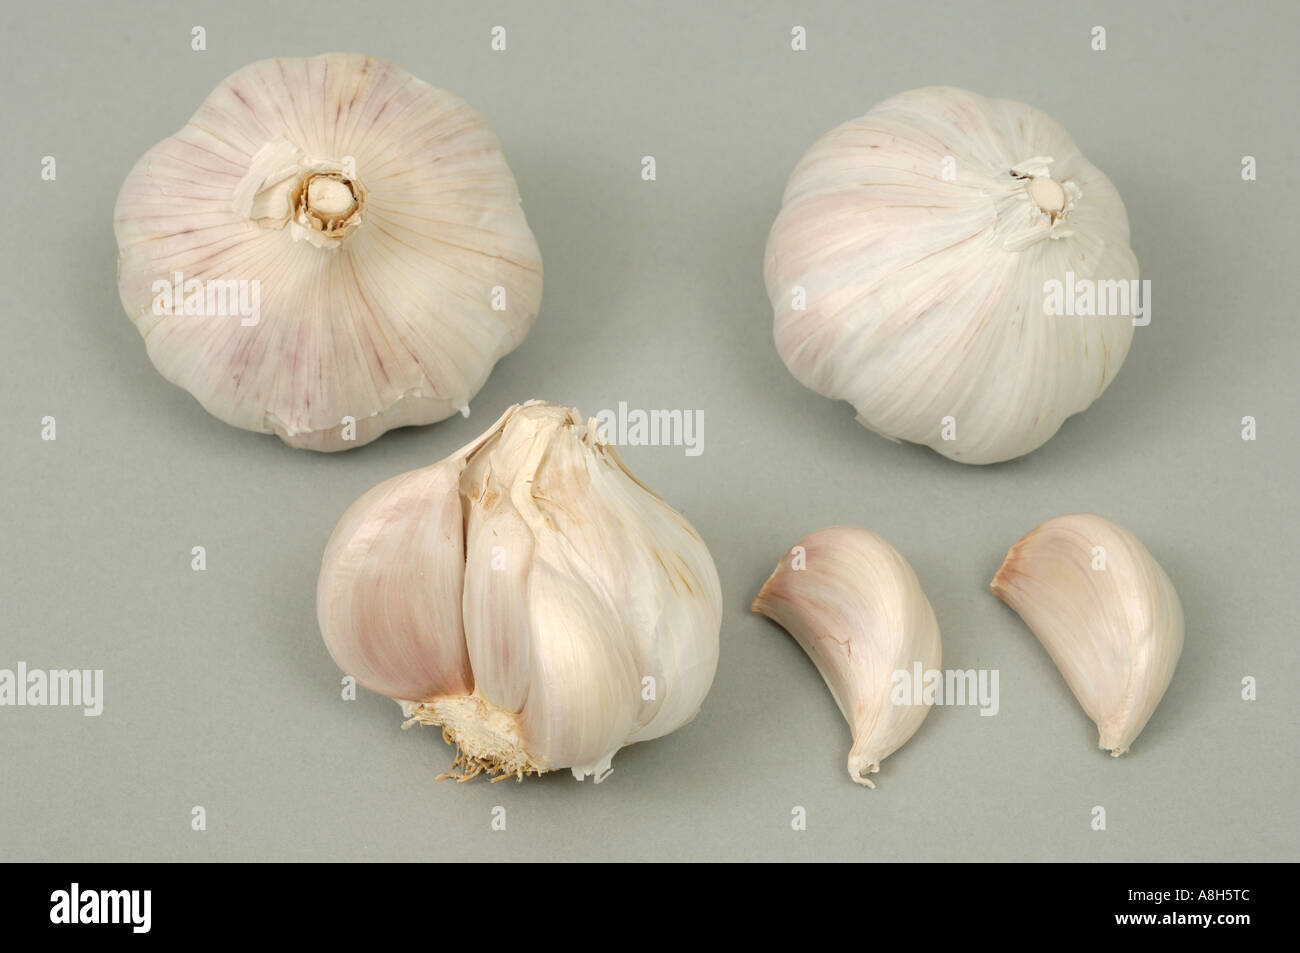 Vegetable produce typical supermarket bought garlic bulb cloves Stock Photo